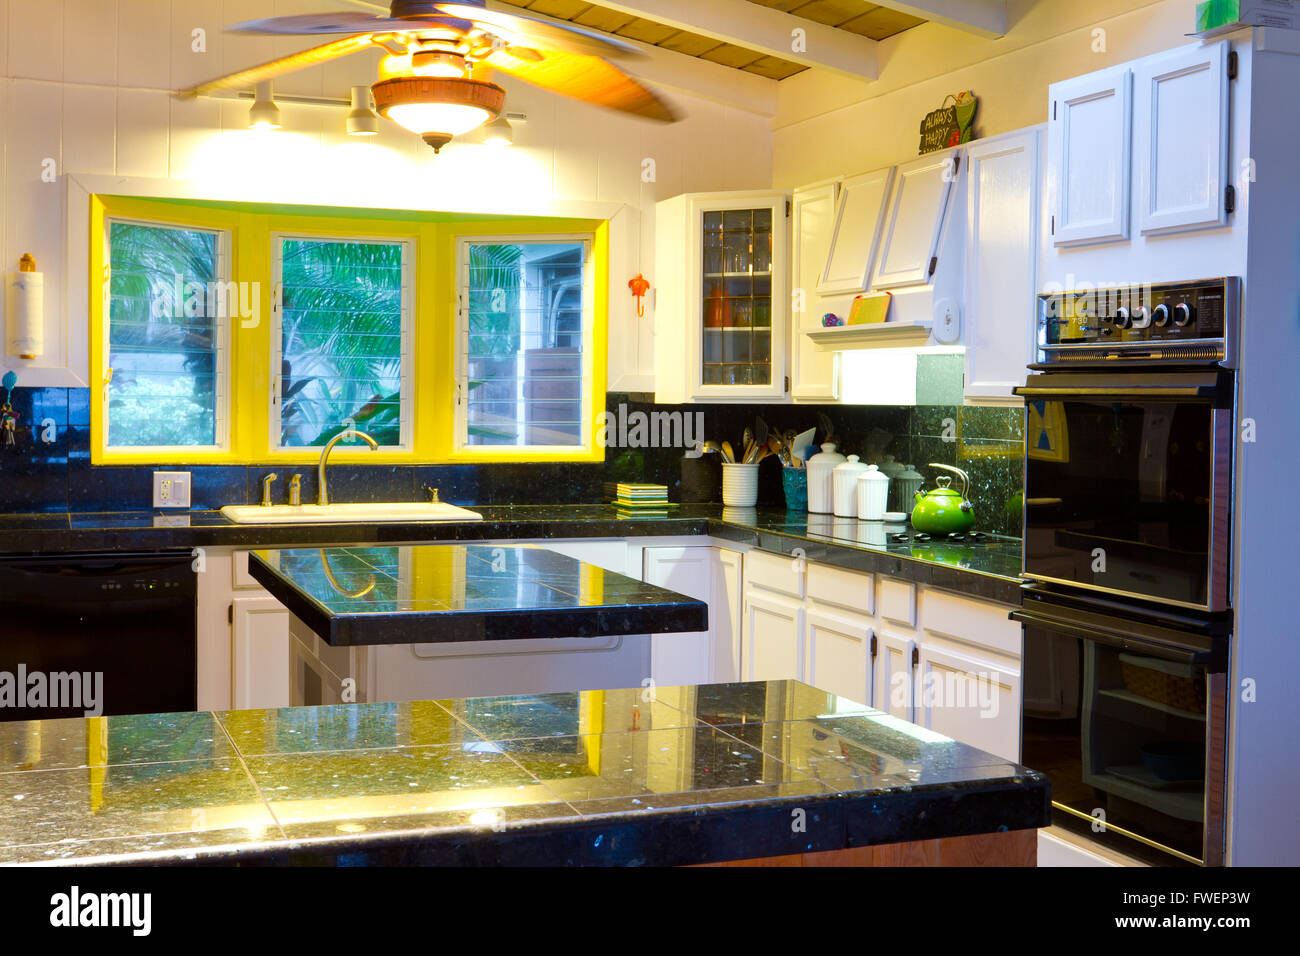 A beautiful and clean white and black kitchen in this rental home on the tropical island of Oahu Hawaii. Stock Photo